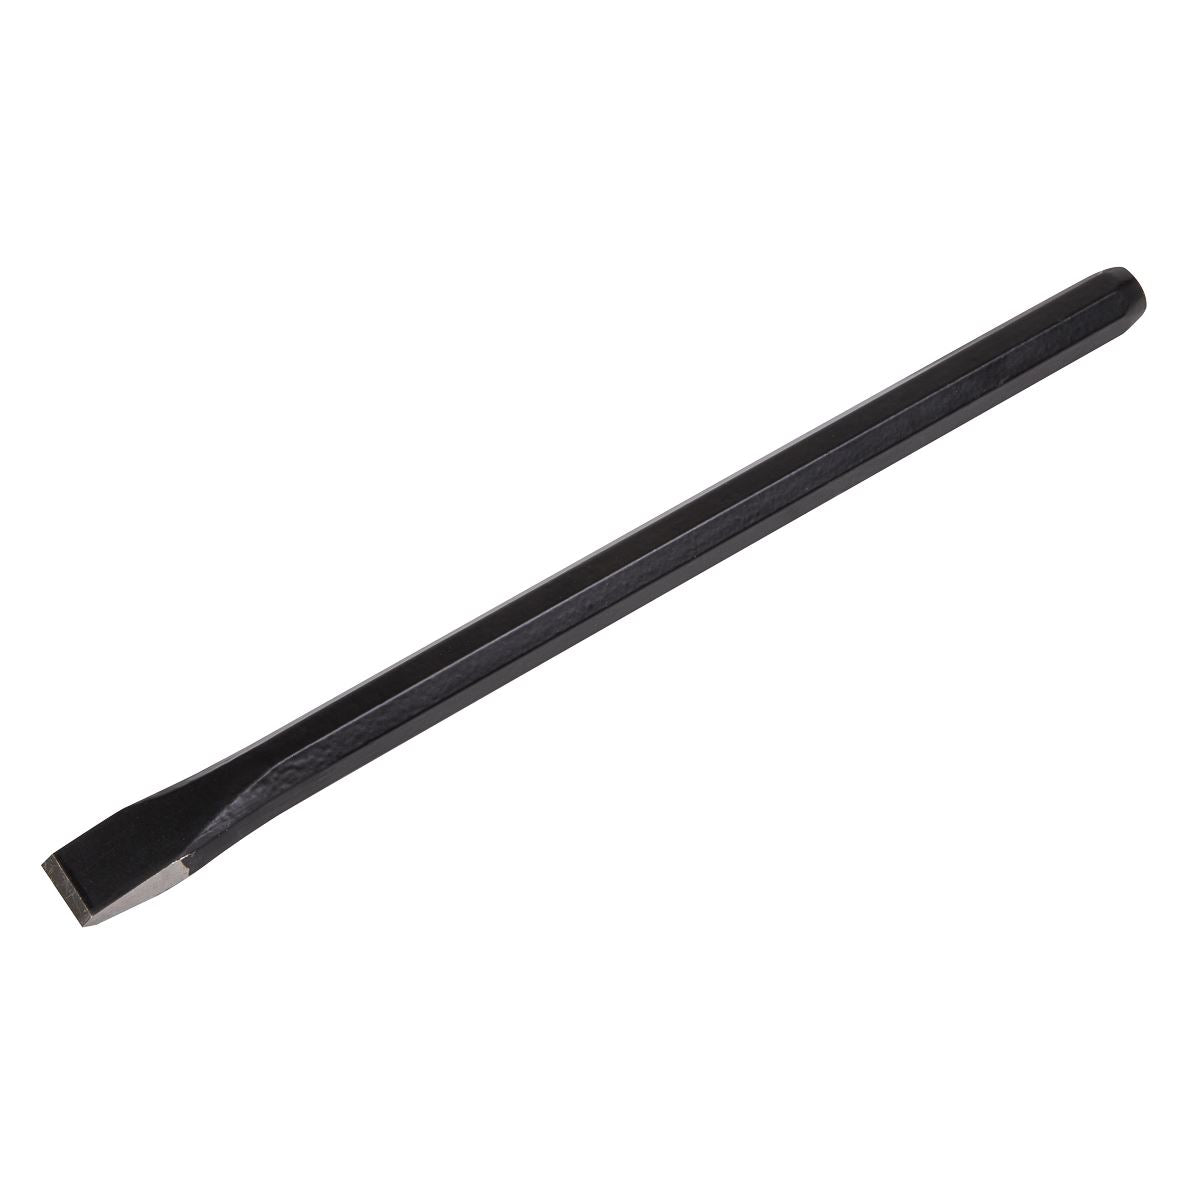 Sealey Cold Chisel 19 x 300mm